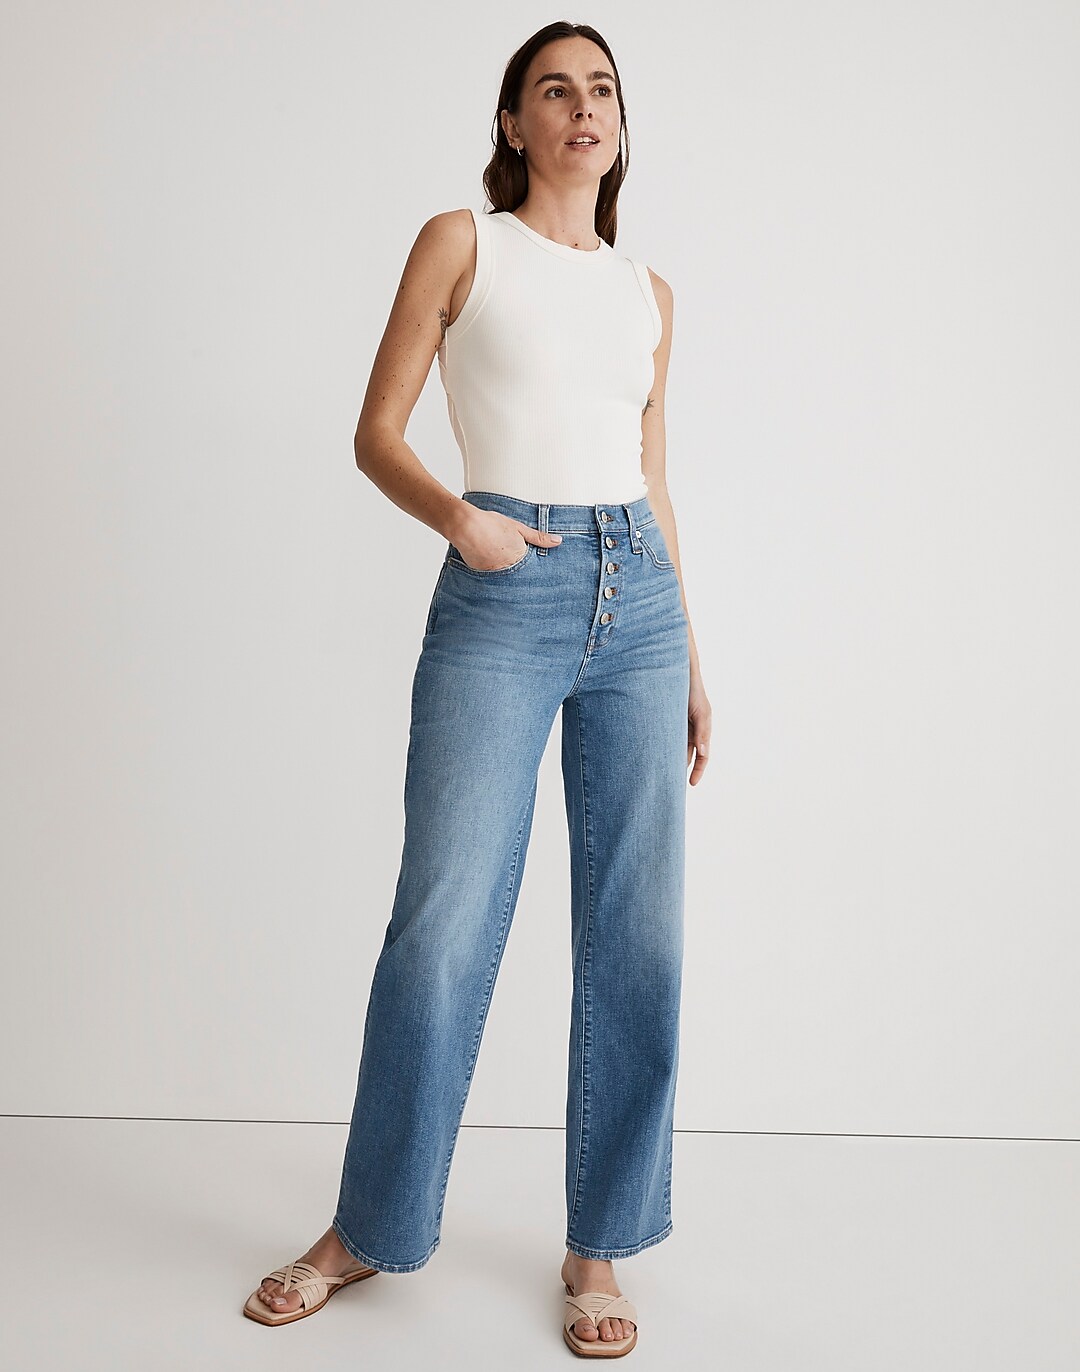 The Petite Perfect Vintage Wide-Leg Crop Jean in Ohlman Wash